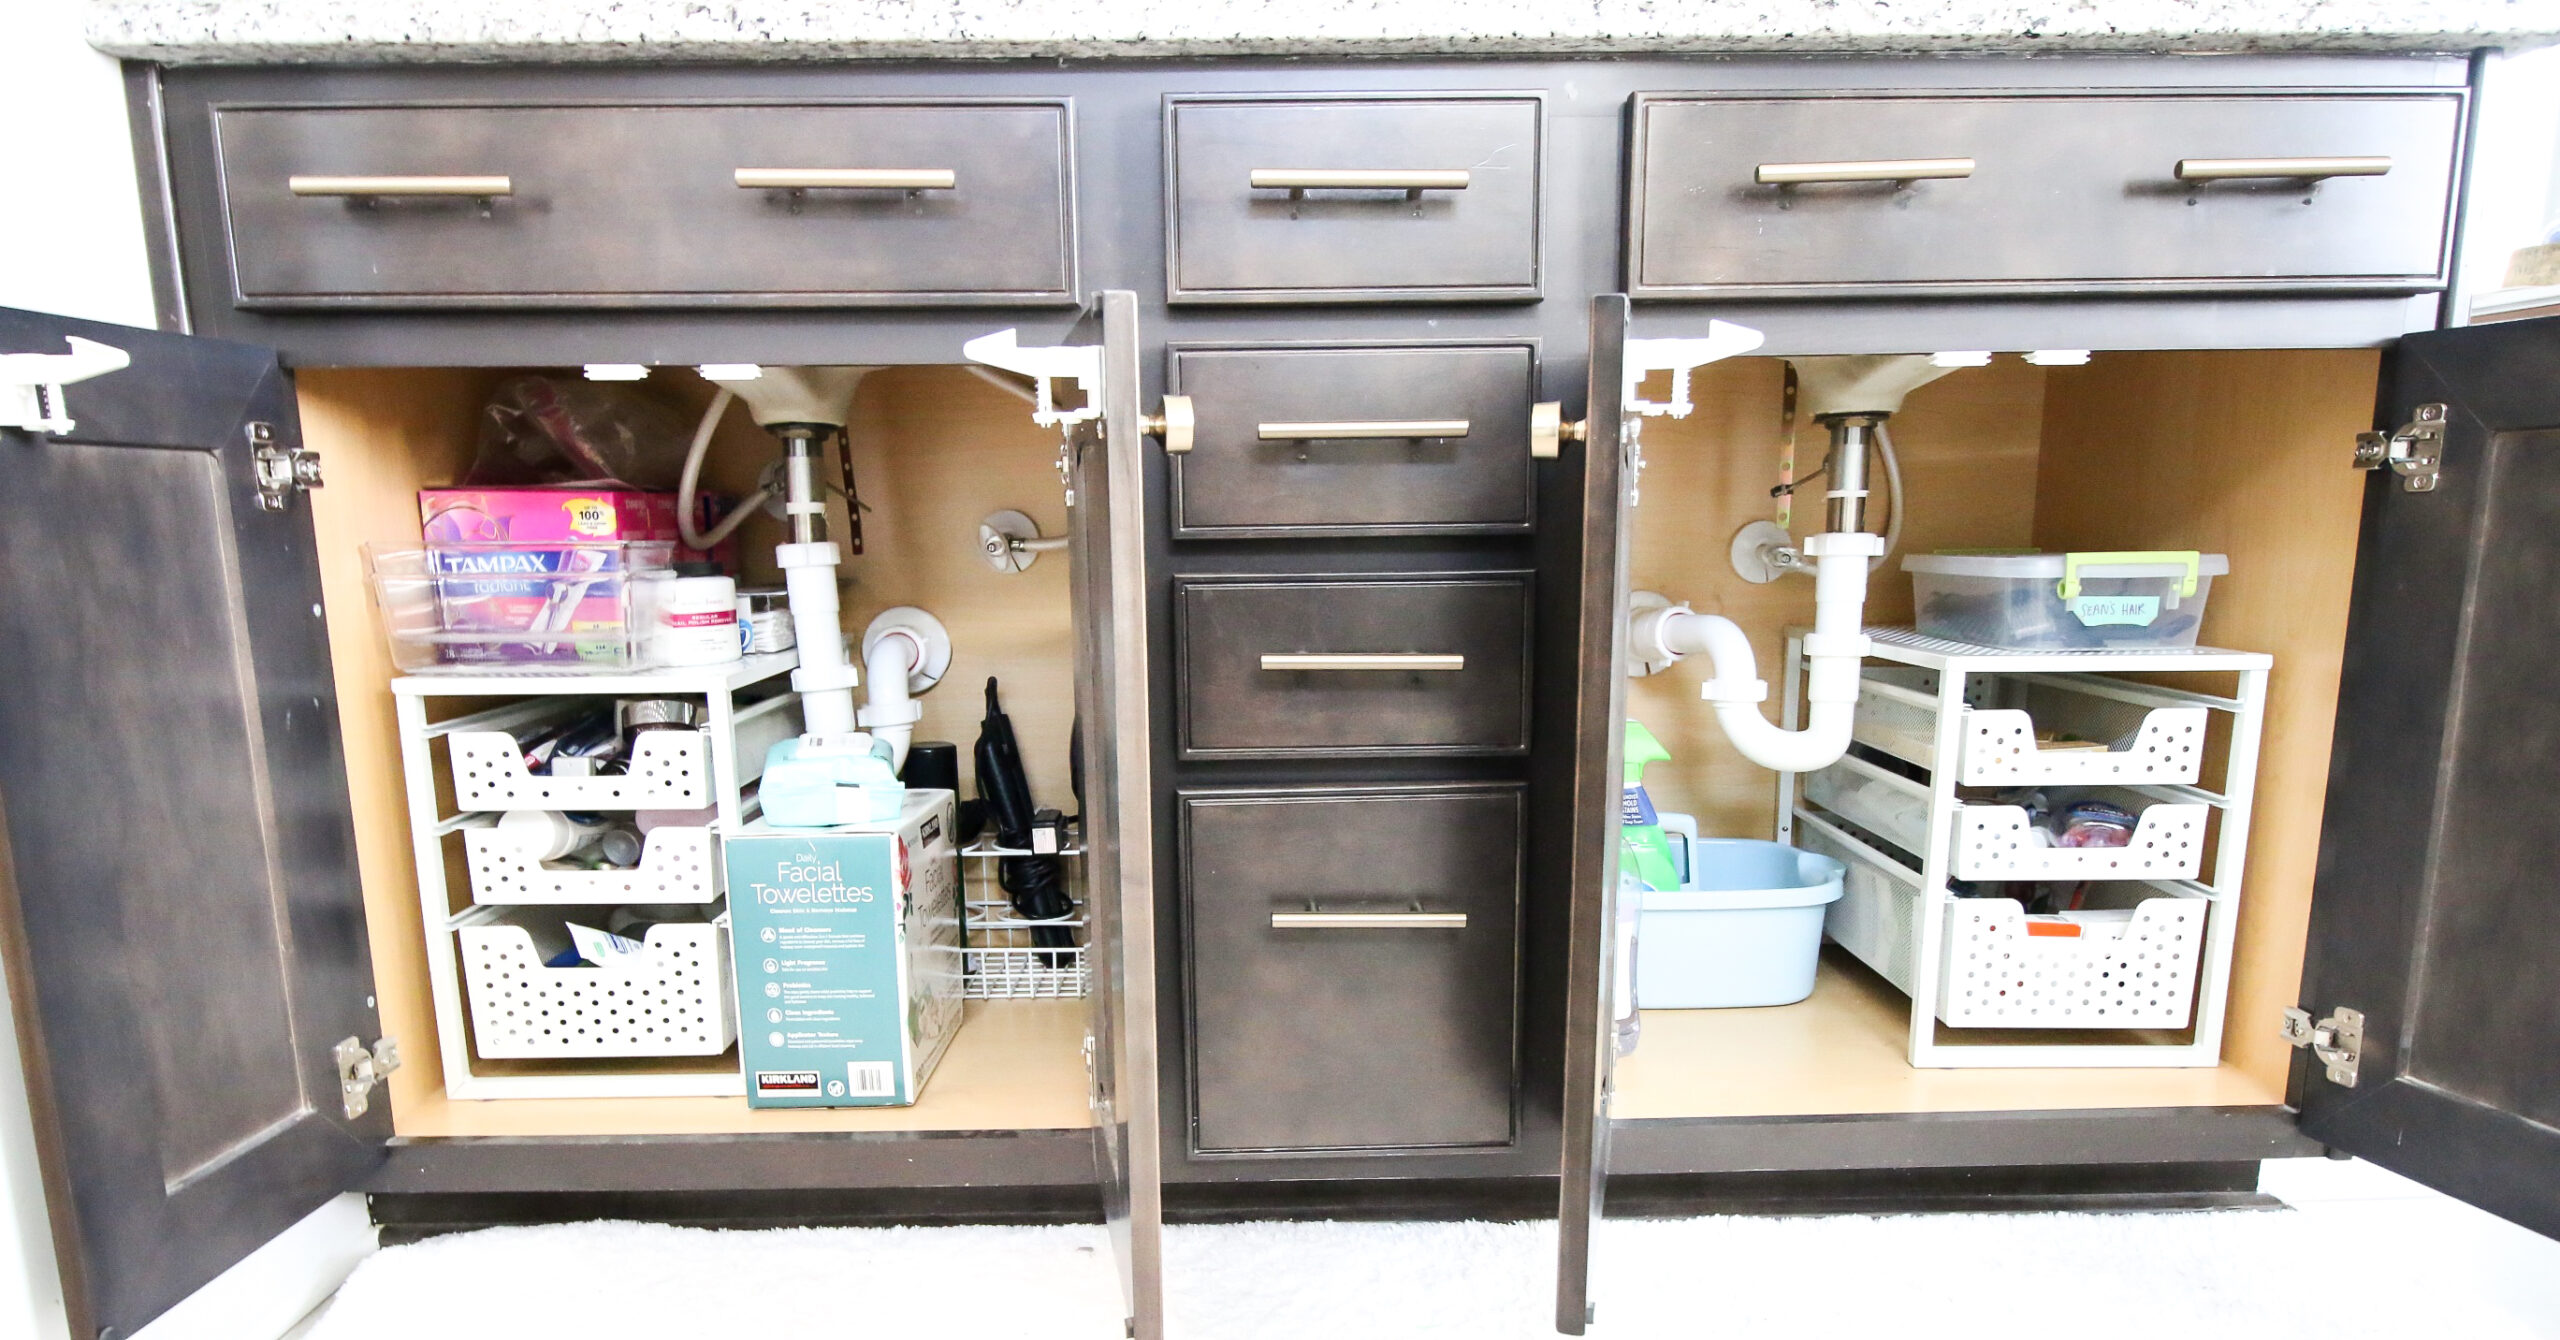 22 Under-Sink Storage Ideas to Bring Order to Your Cabinets